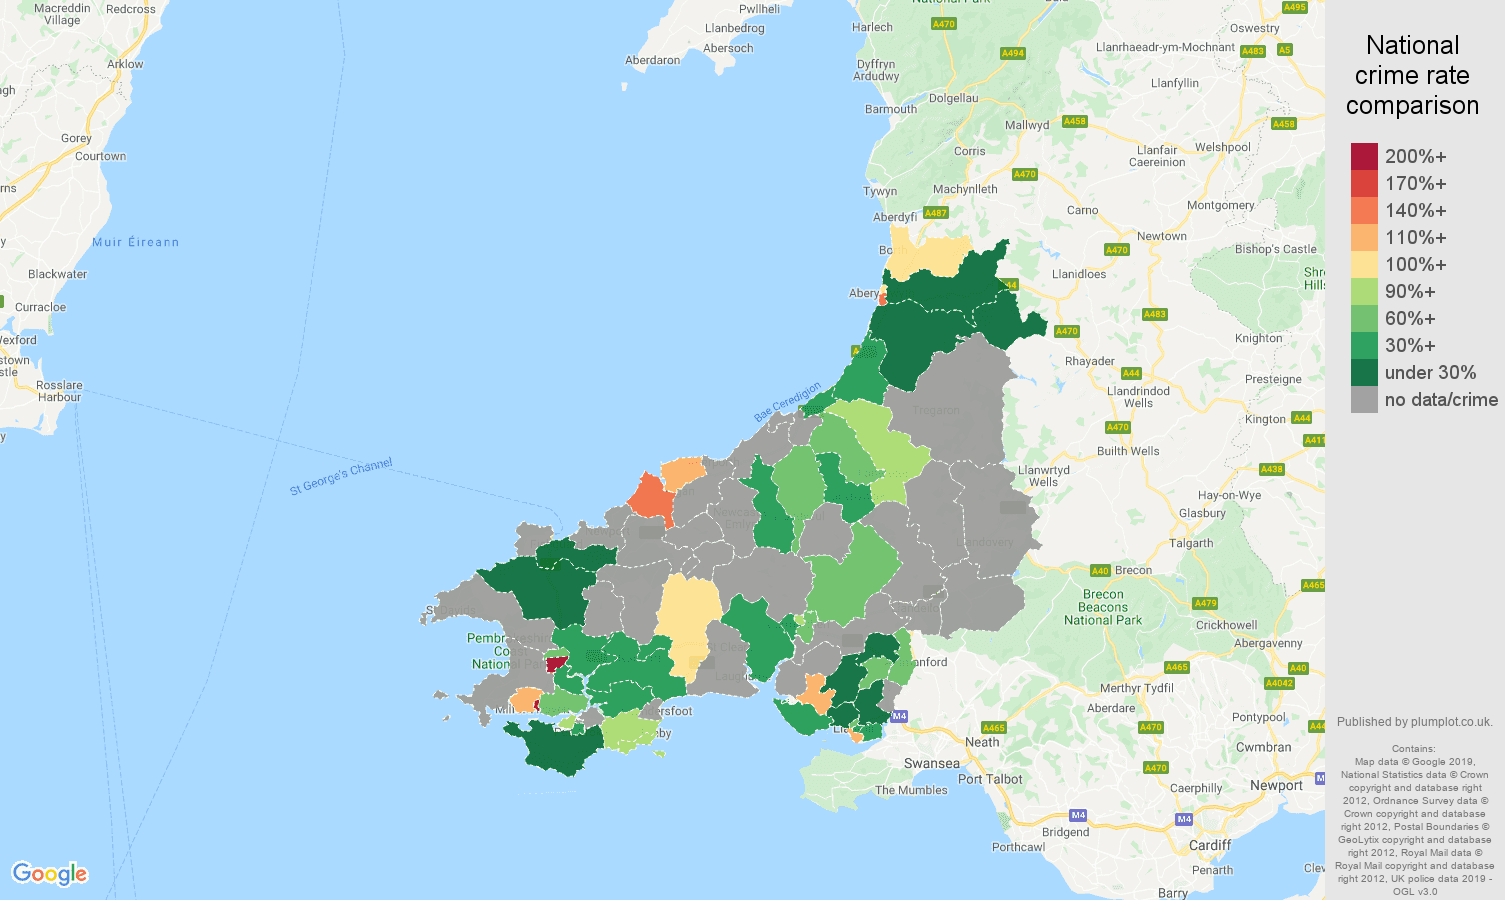 Dyfed possession of weapons crime rate comparison map